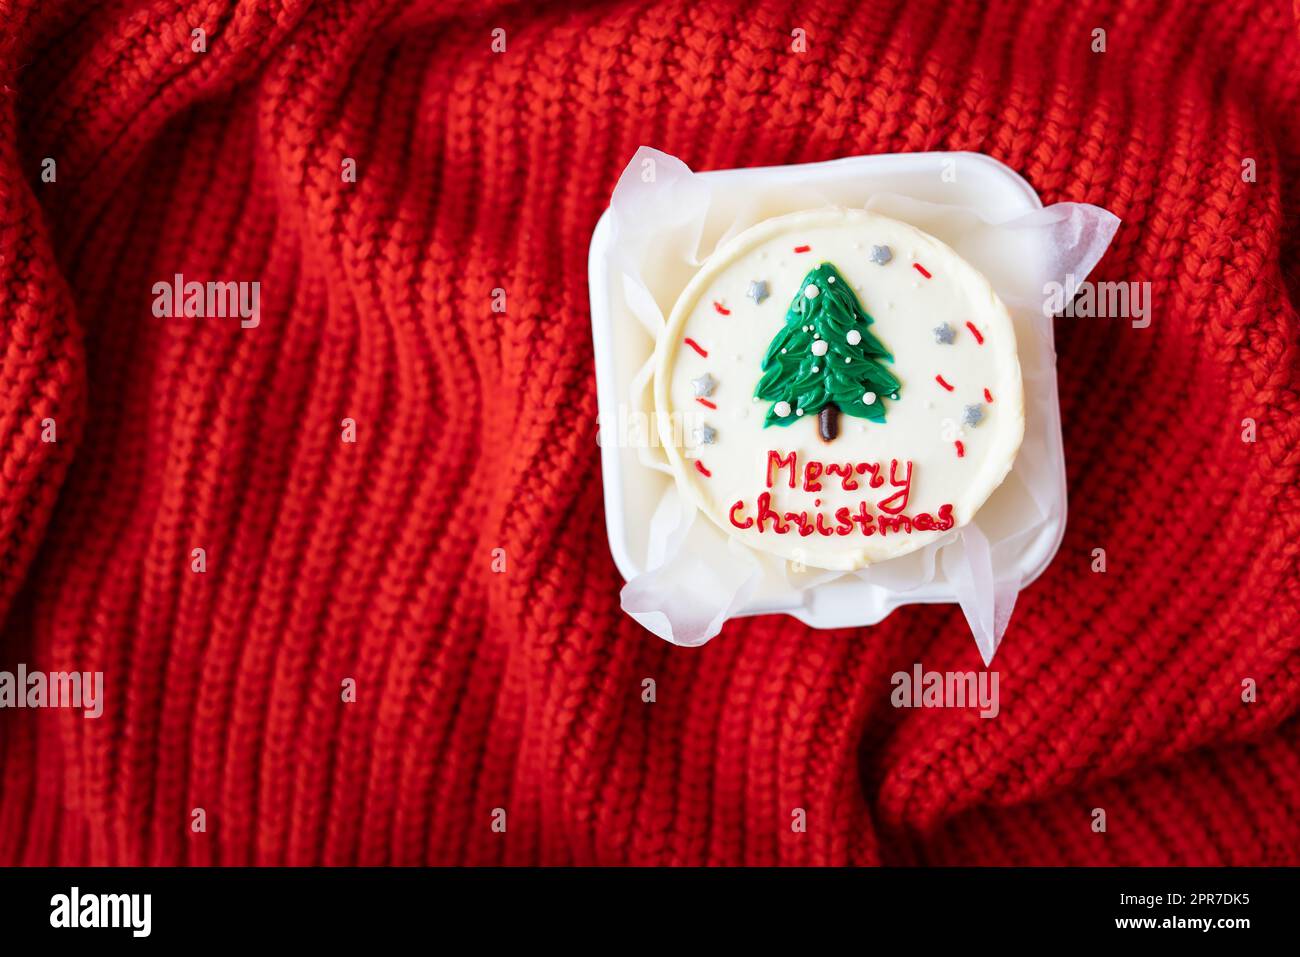 Christmas cake with the inscription merry christmas, decorated with icing, on a red background, top view. Stock Photo